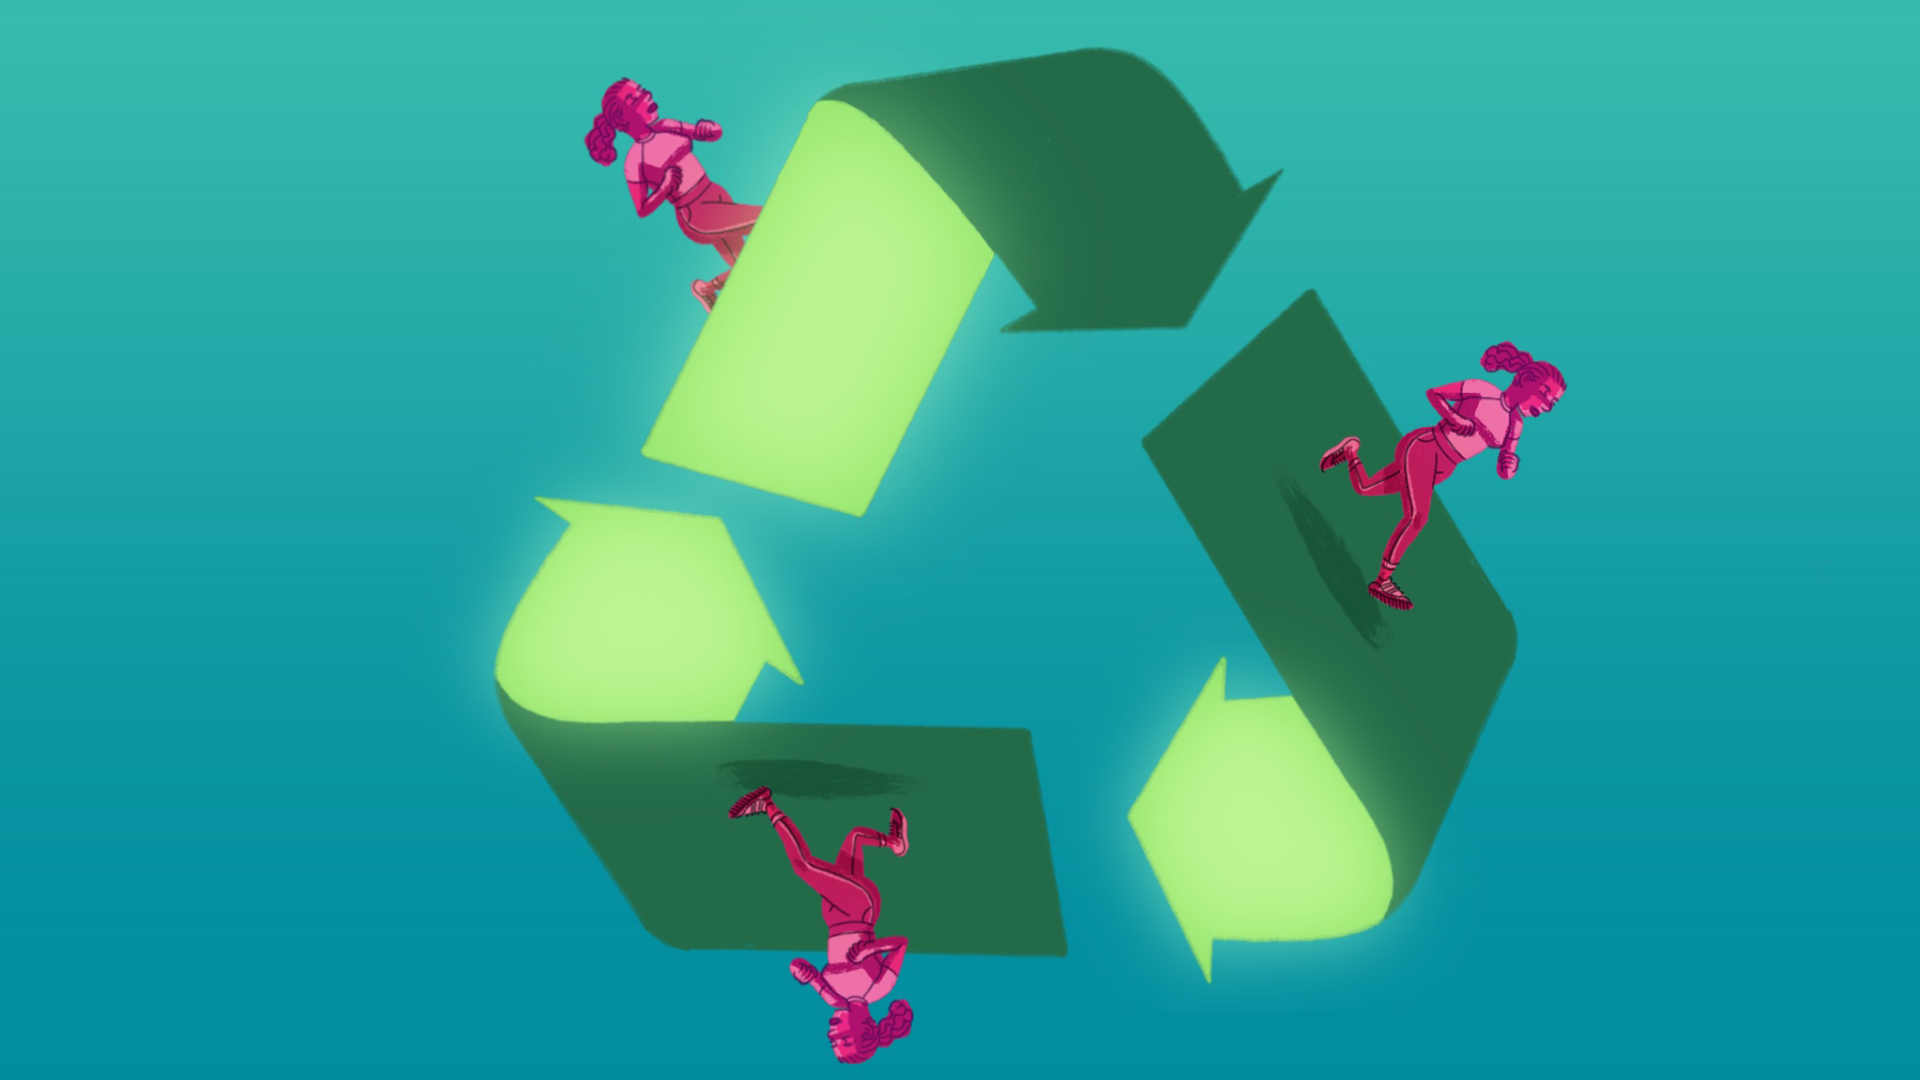 An illustration of a green recycling symbol on a blue background. A small human runs around the edge of the recycling symbol.